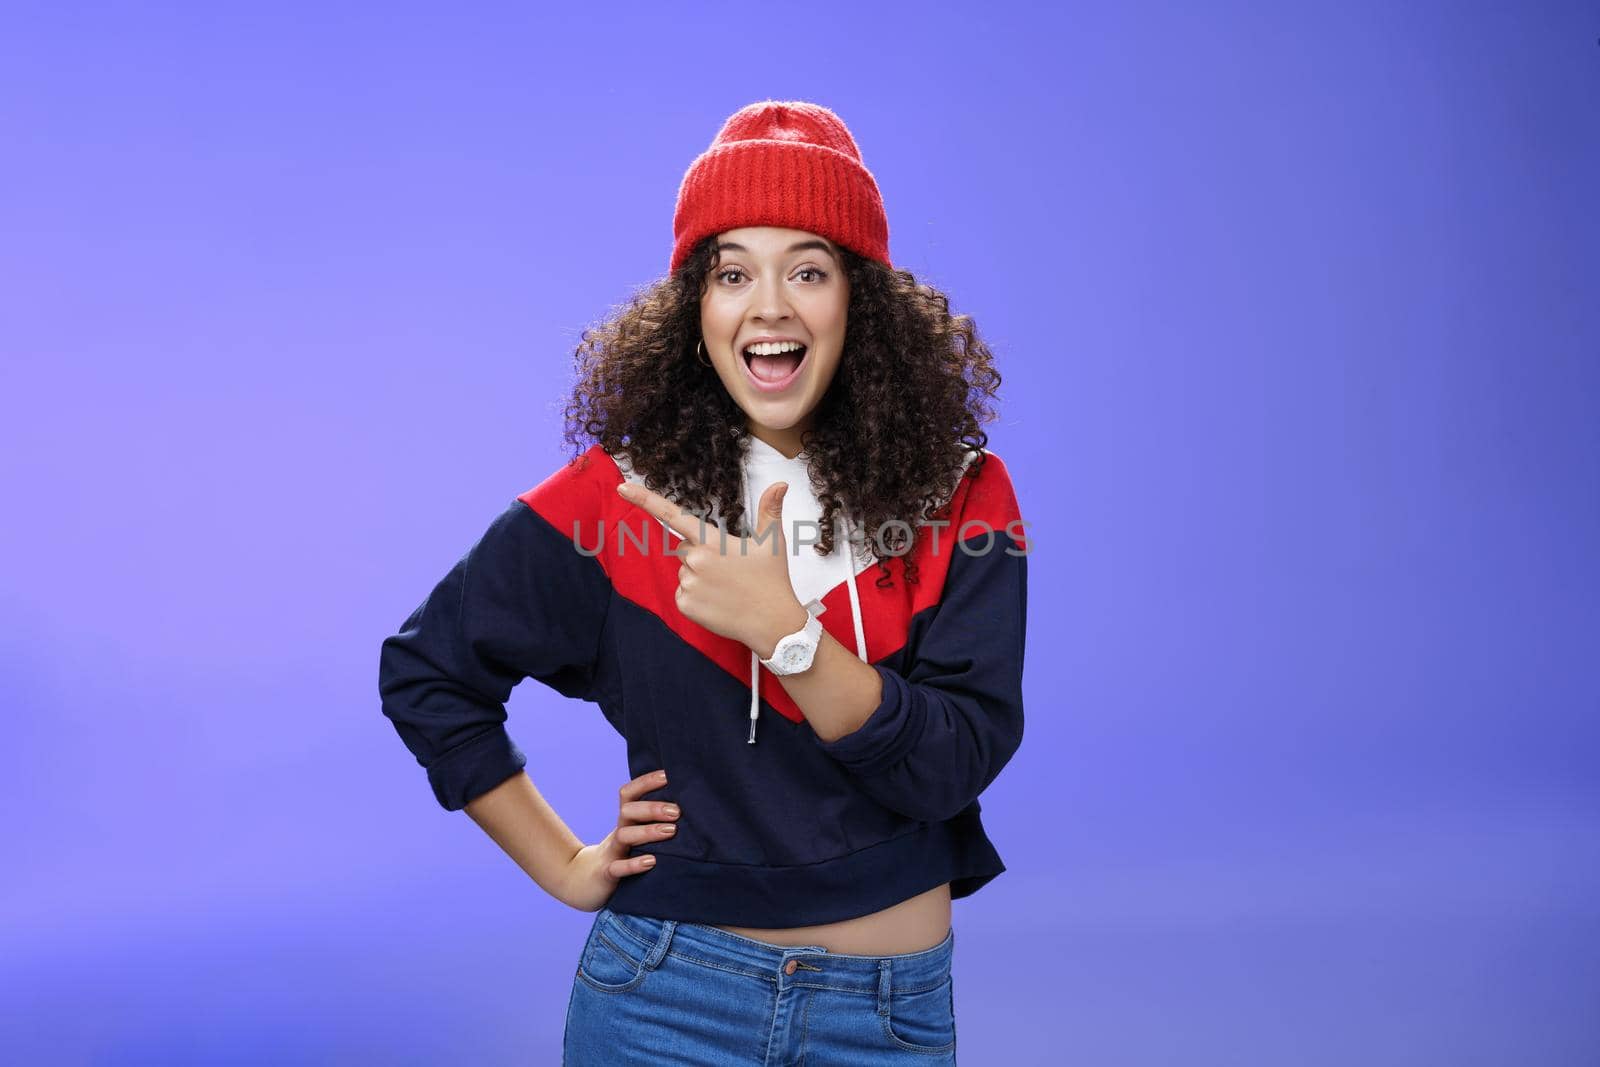 Portrait of enthusiastic and sociable european woman in warm hat and sweatshirt smiling delighted with amused grin as pointing at upper left corner impressed and astonished with awesome promotion.